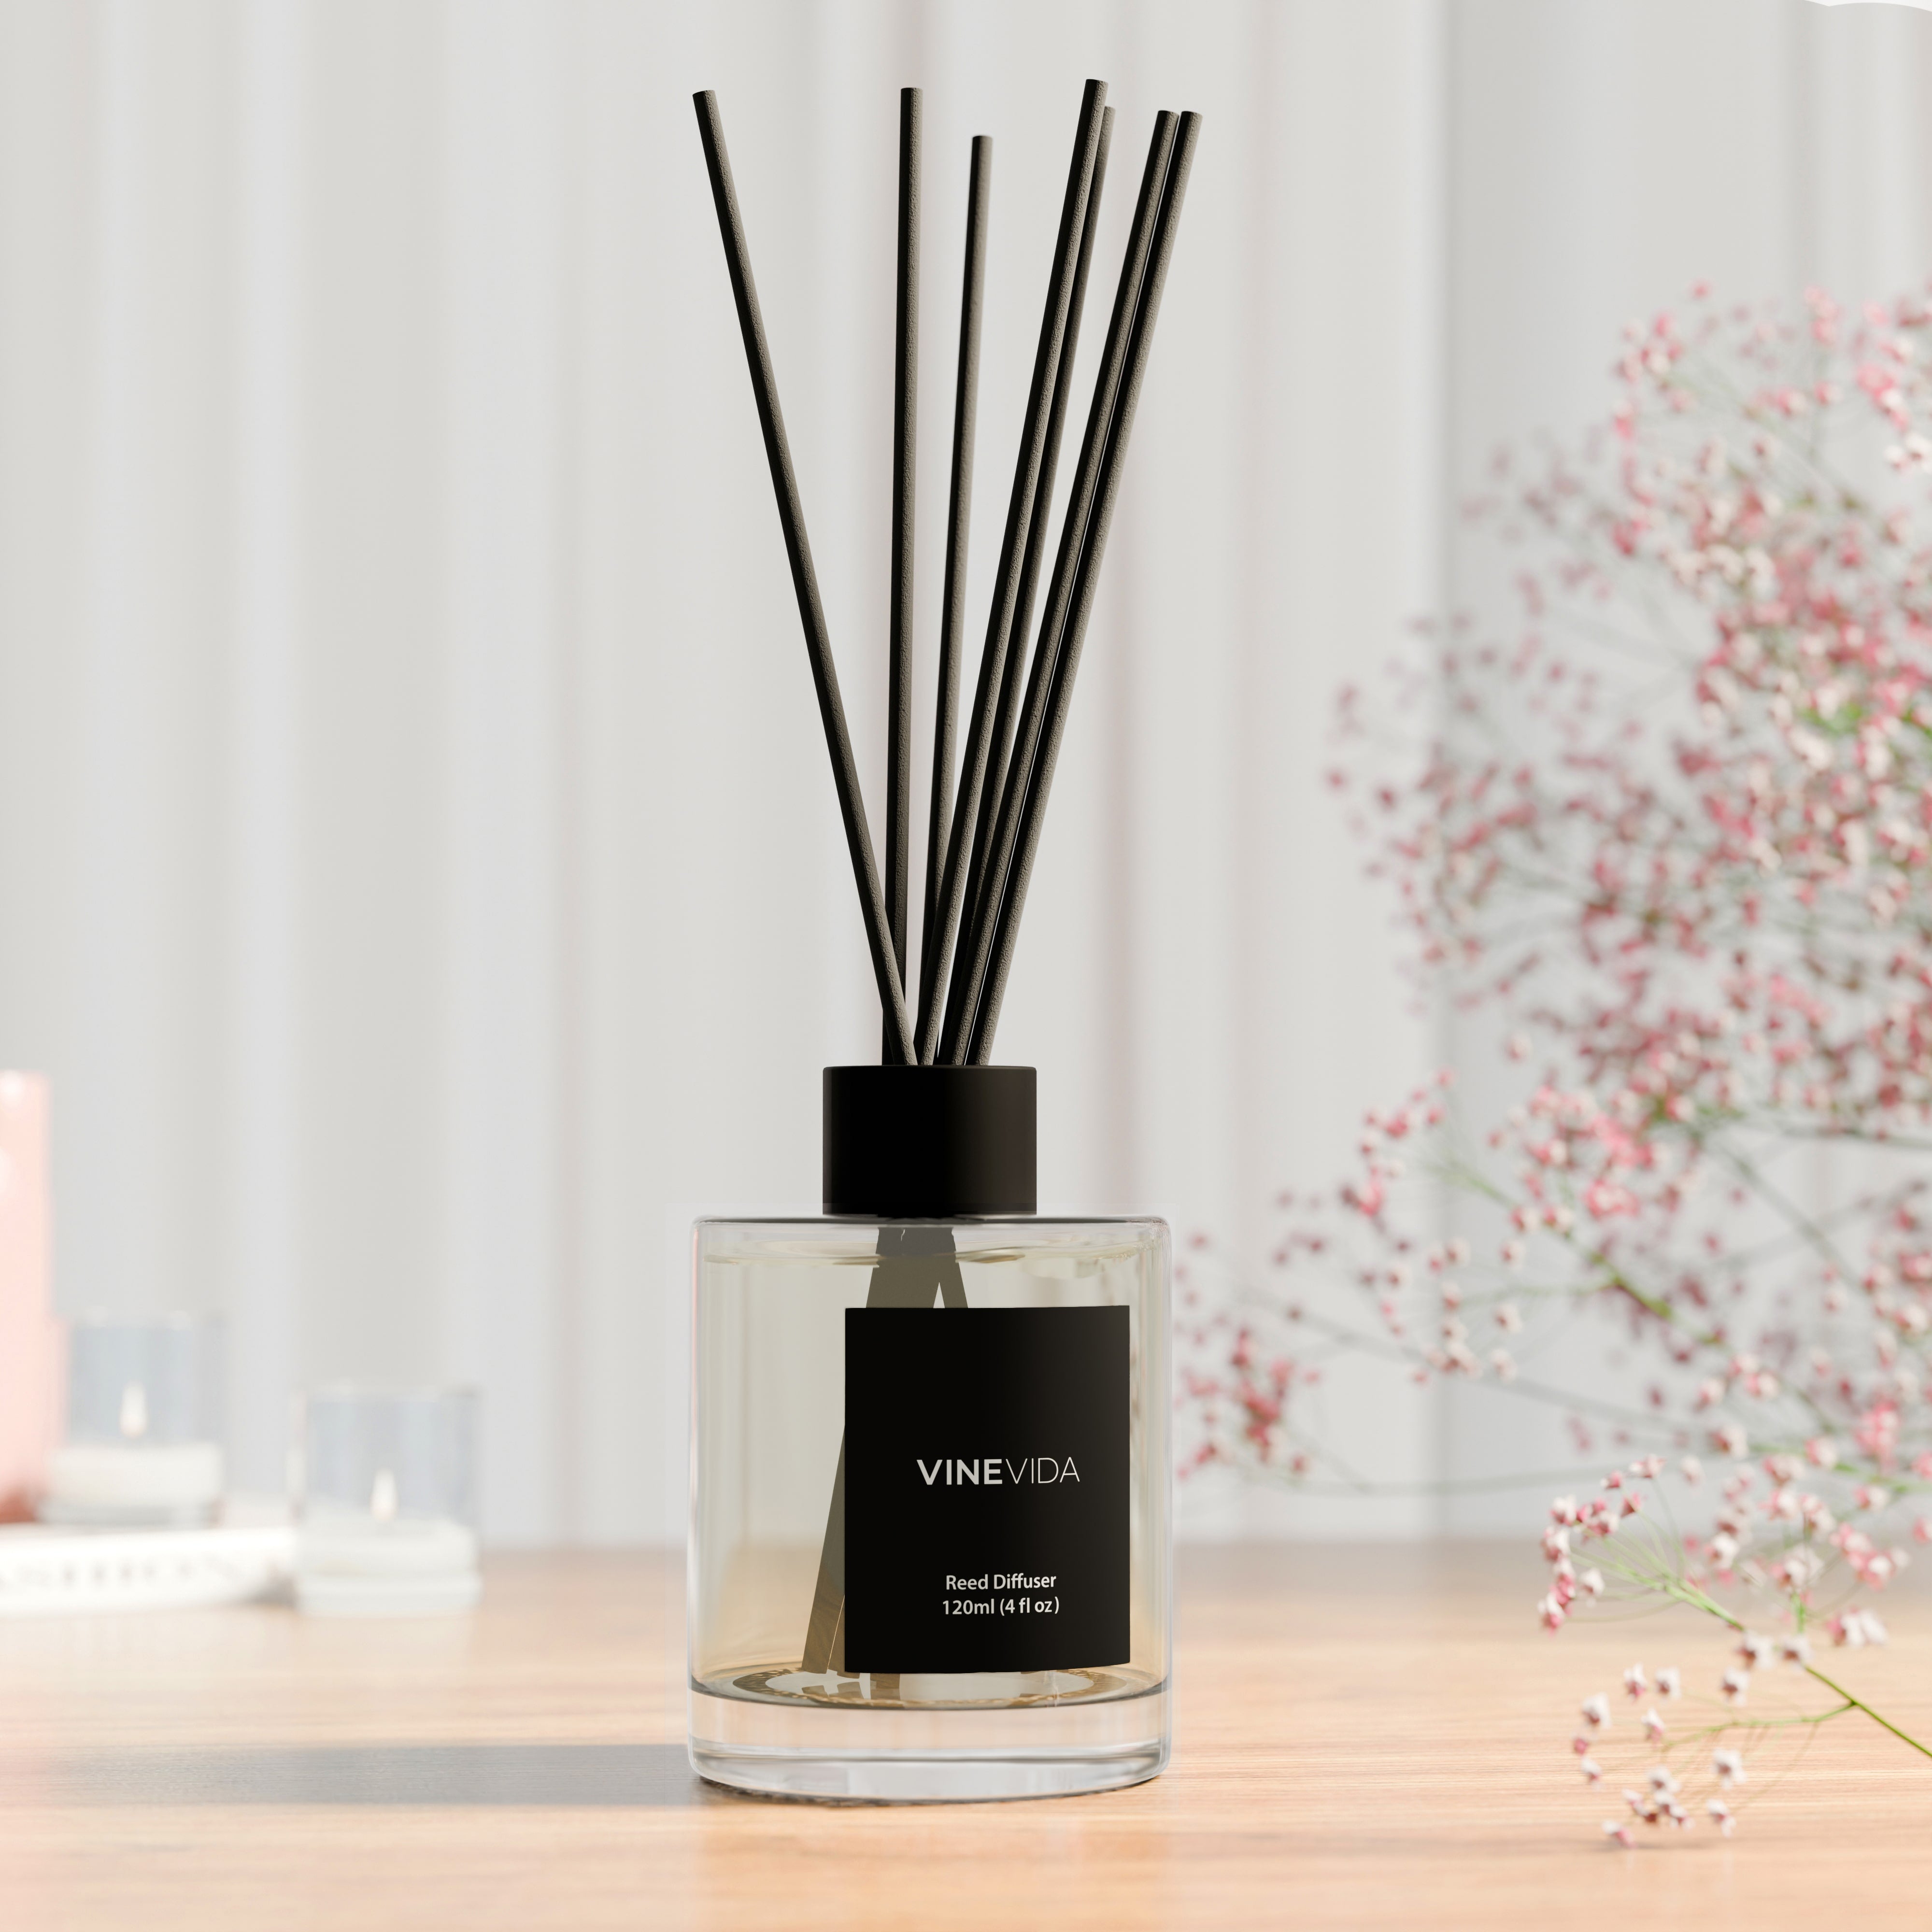 NO. 1101 Reed Diffuser - Inspired by: A Thousand Wishes by Bath & Body Works